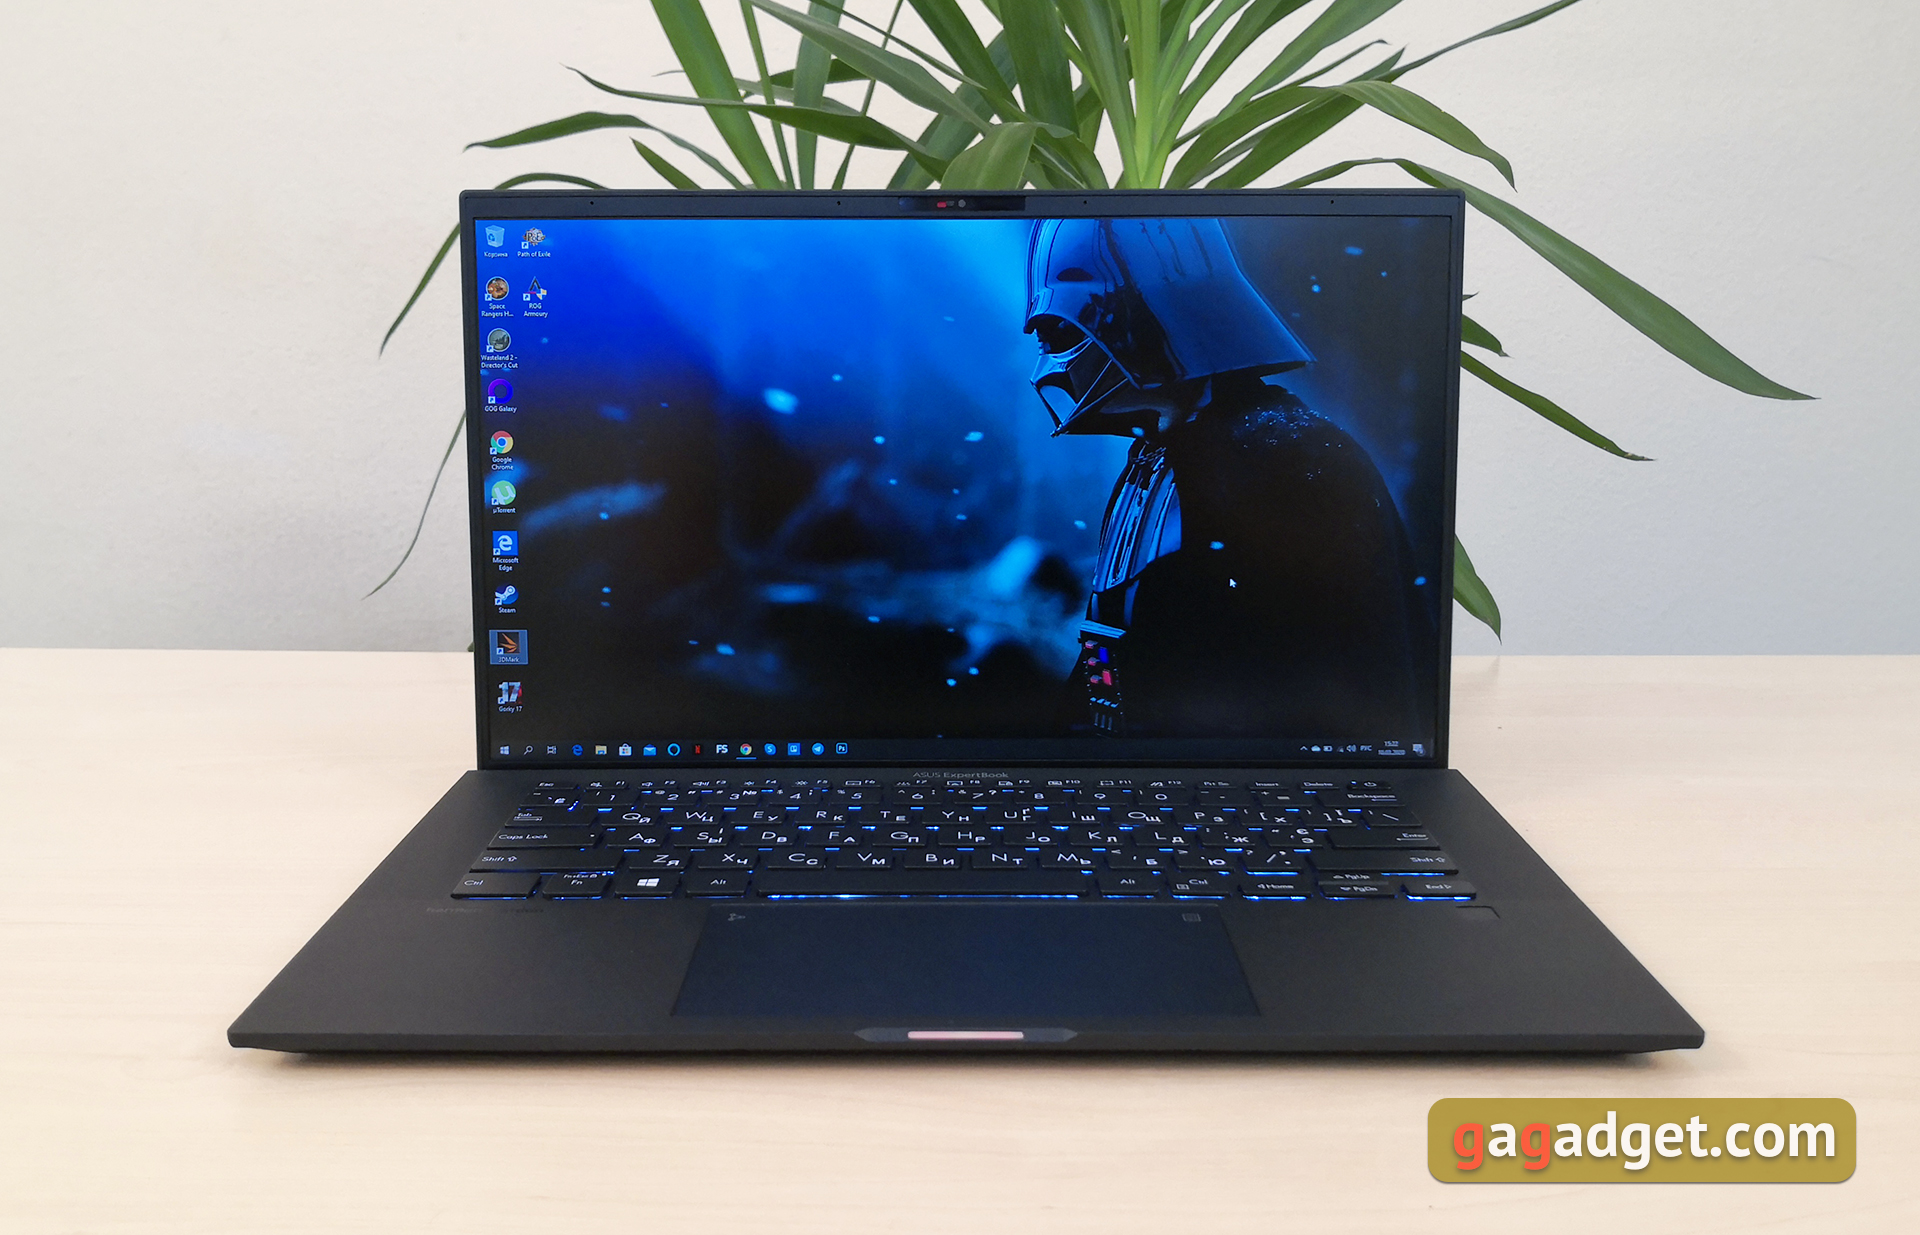 ASUS ExpertBook B9450 Looks Back: Ultra-Light Business Laptop with Fantastic Autonomy-2' / ></p>
<p>ASUS has put a lot of black and brown solutions into the ExpertBook B9450FA. Consider a laptop less than 995 g in our configuration with a large battery, and a modest version – 870 g. With this, it is hard to believe that the case is more powerful and complies with the MIL-STD 810G standard, and a small amount can be safely poured onto the keyboard. A touchpad of confusion with a touch digital panel (also known as NumberPad). With this, the 10th generation Intel Core i5 or i7 processors are installed in the middle, 8-16 GB of RAM in dual-channel mode and up to 2xSSD NVMe PCIe 3.0×4 storage capacity of 1 TB leather. Let’s see a physical shield, a fingerprint scanner, an infrared camera for the spy, a TPM 2.0 module, a physical webcam shutter and a LAN via micro HDMI with a fixed MAC address. Before speech, about roses: їх еж а sufficiency of quantity. Full HDMI and USB 3.1 Gen 2 plus 2xThunderbolt 3 USB-C. Three wireless interfaces, Wi-Fi 6 (802.11ax) and Bluetooth 5.0. The screen is a 14-inch IPS from a FullHD retail building, with a matte finish and Panel Self Refresh technology (more details below). Announce that the hour of autonomous work can become up to 24 years. І one more <a href='https://it.benq.com.ng/page-operatori-di-notizie-e-chiarimenti